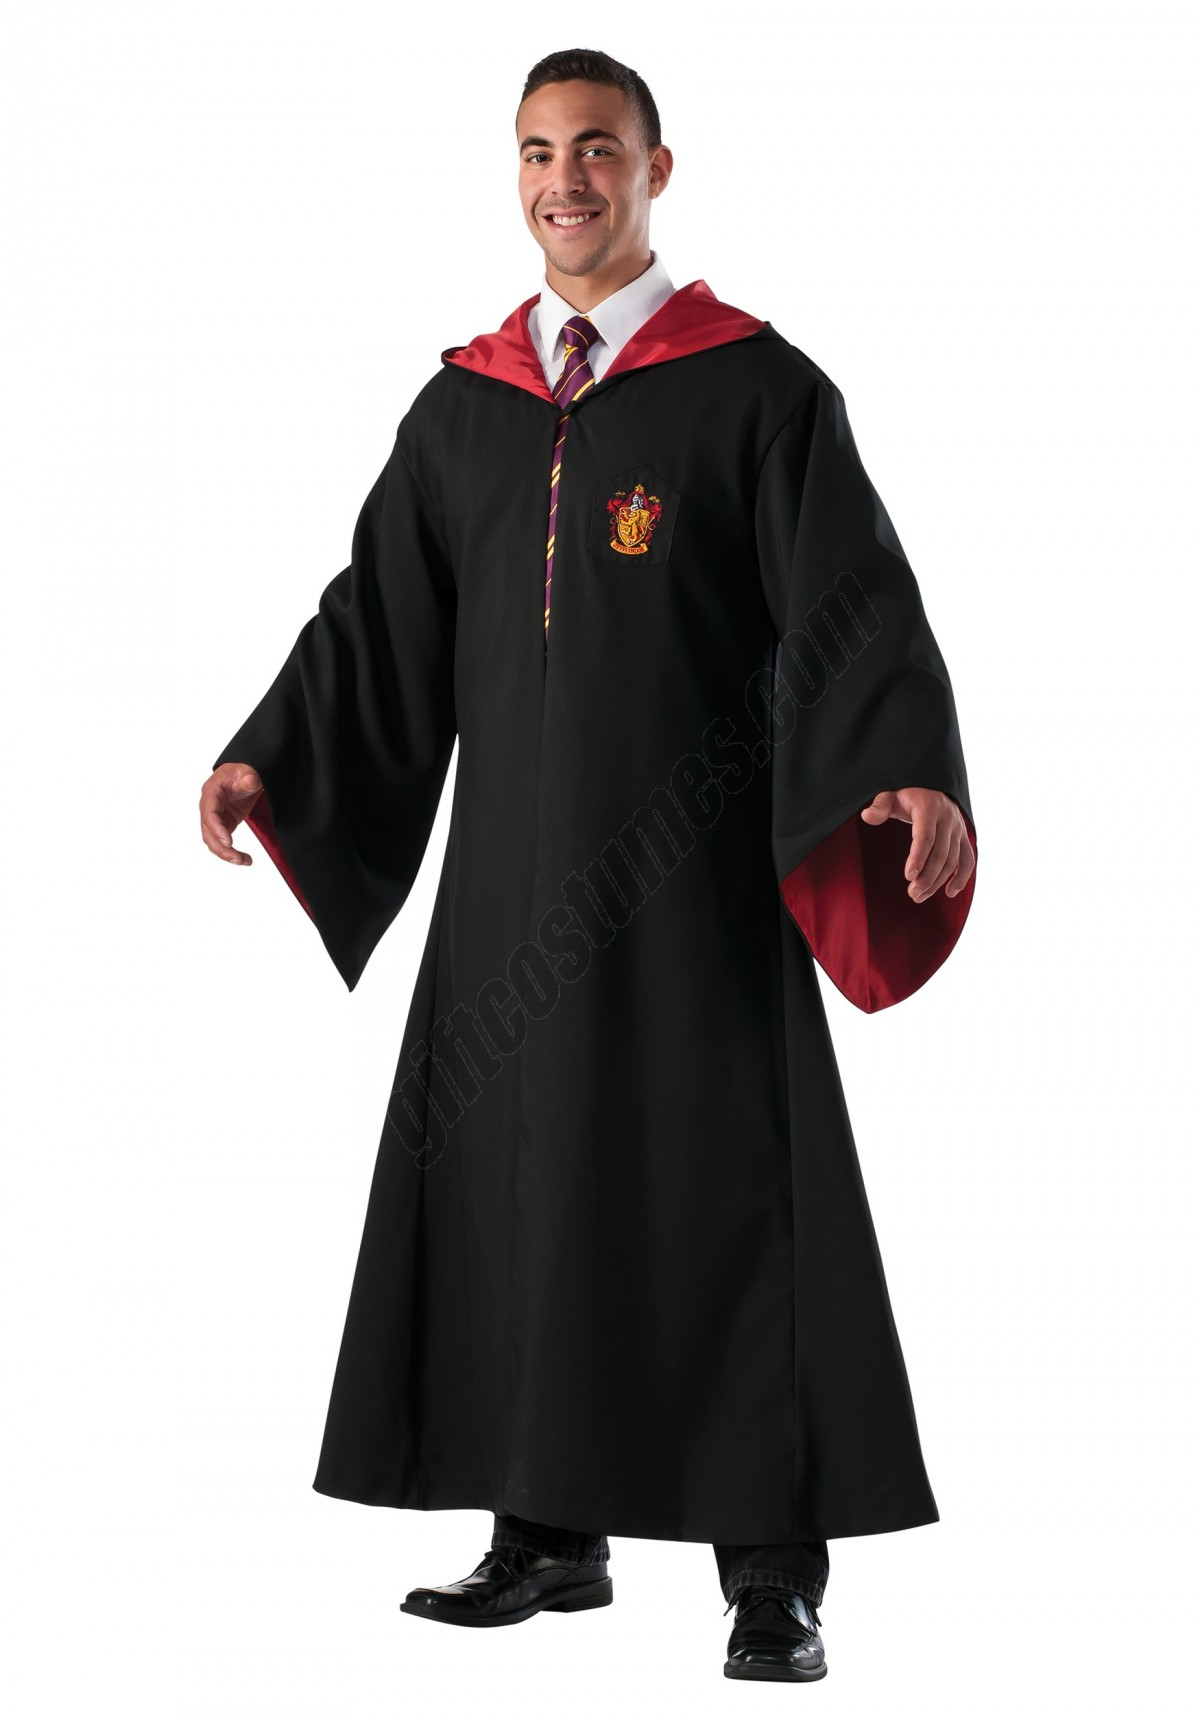 Replica Gryffindor Robe Costume Promotions - -0